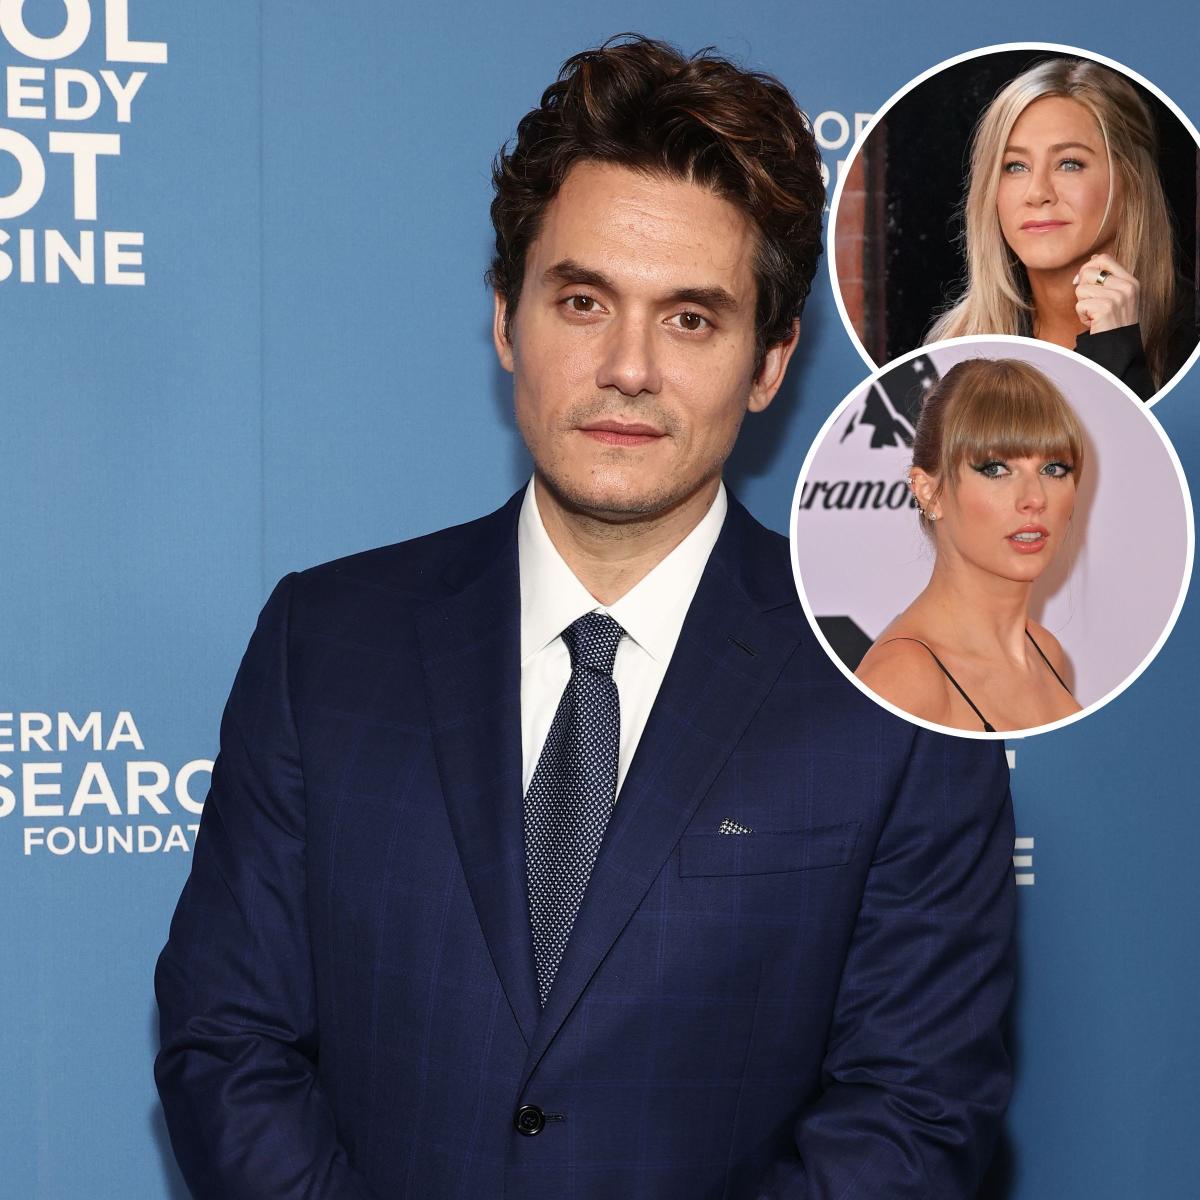 Who Is John Mayer Dating? His List of ExGirlfriends Includes Taylor